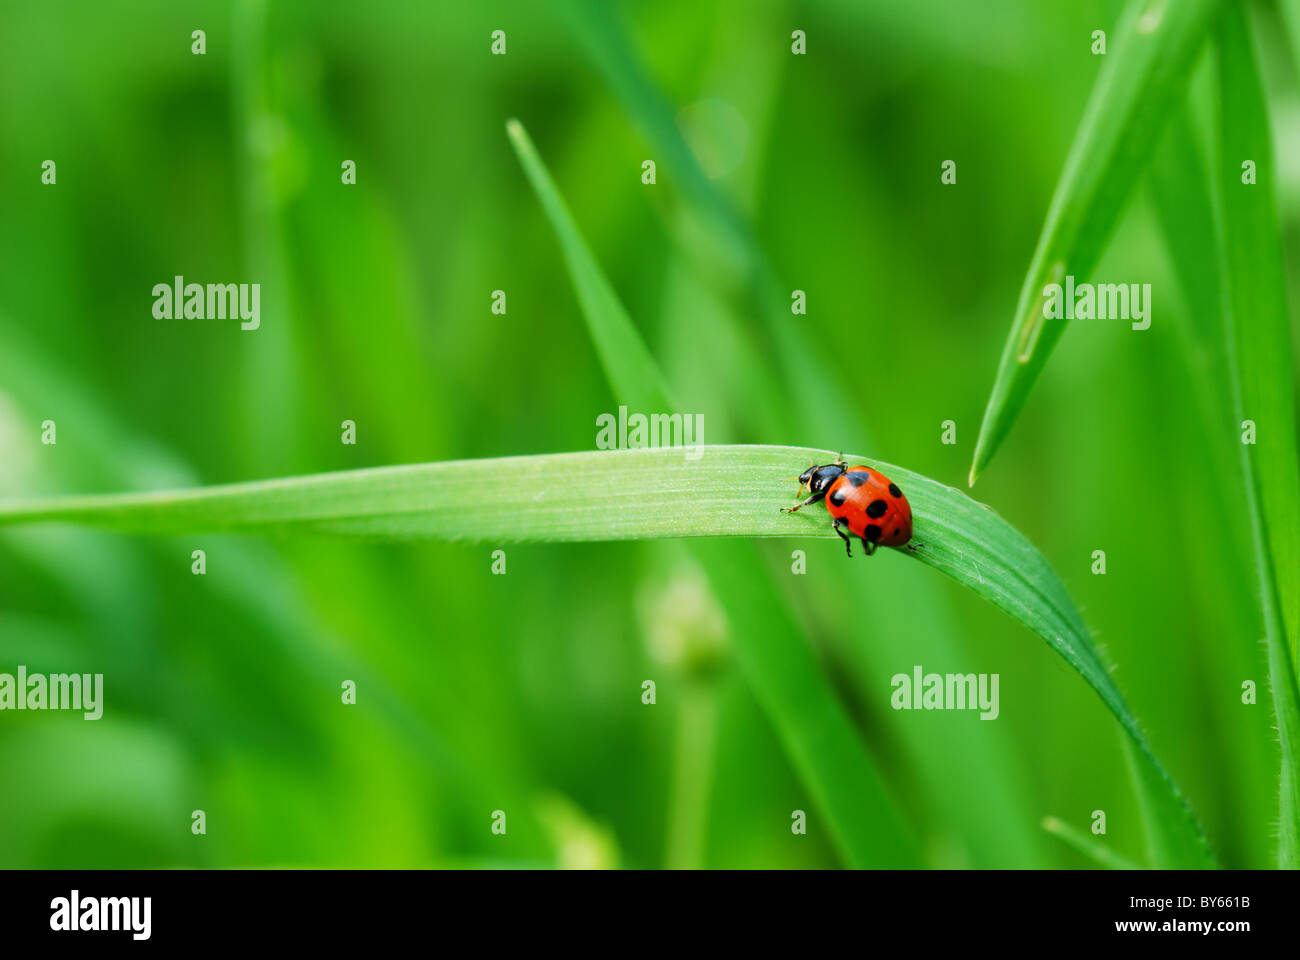 Red spotted Ladybird on green blade of grass (selective focus on ladybird back) Stock Photo